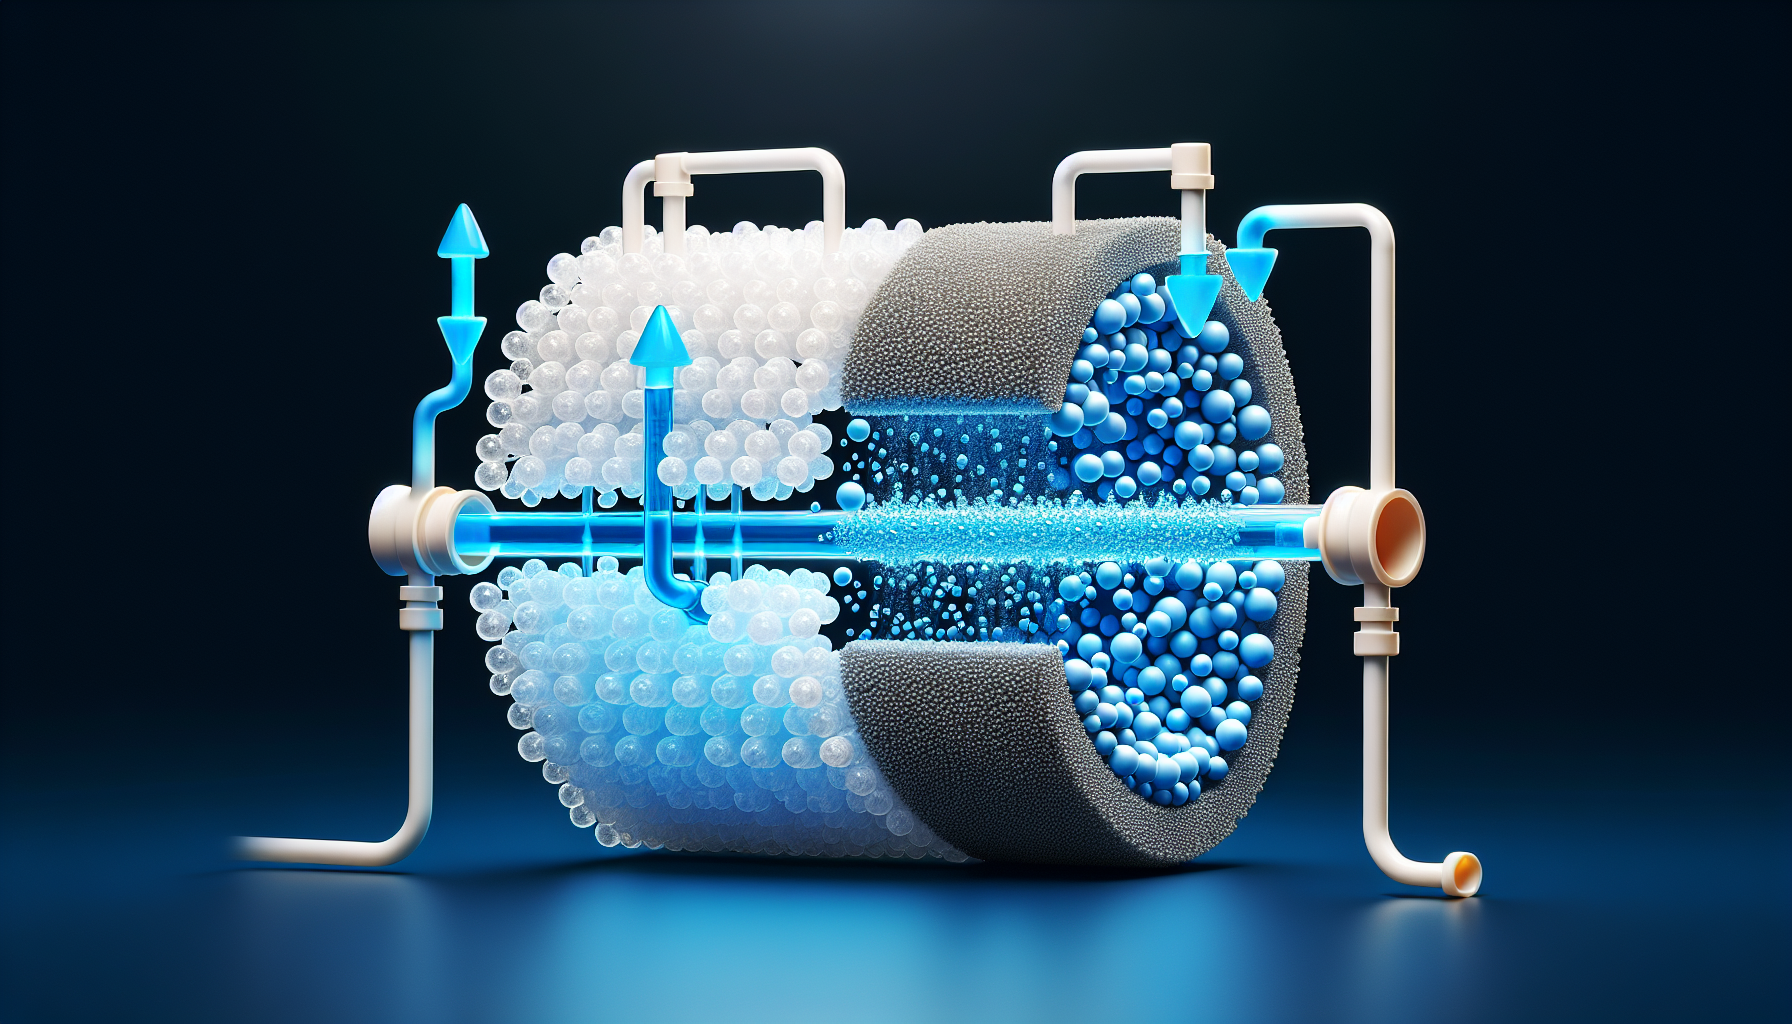 Ion exchange process in a water softener system